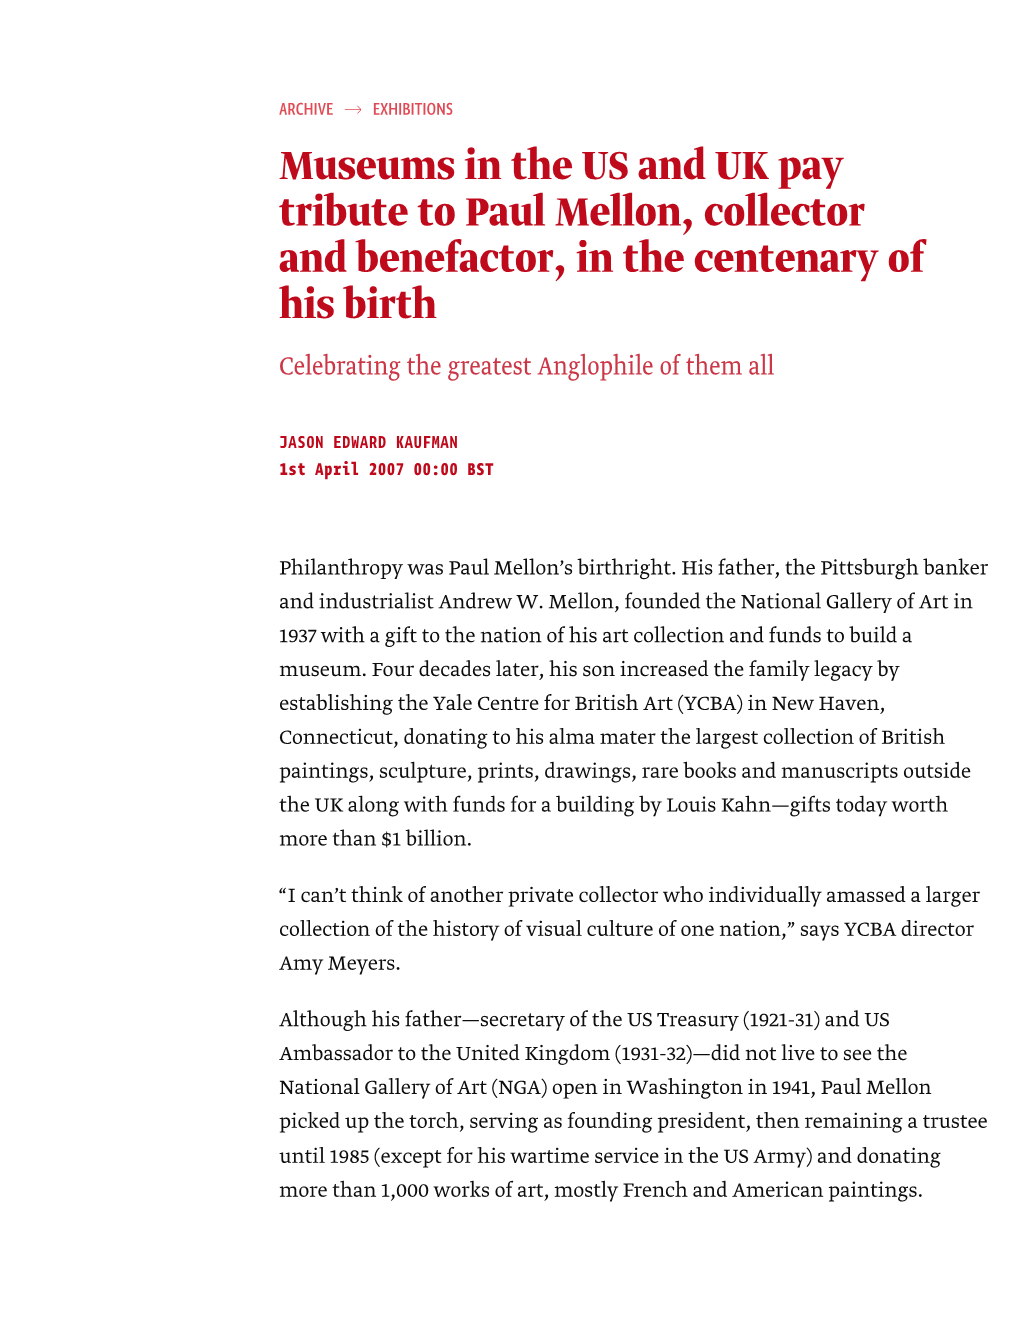 Museums in the US and UK Pay Tribute to Paul Mellon, Collector and Benefactor, in the Centenary of His Birth Celebrating the Greatest Anglophile of Them All